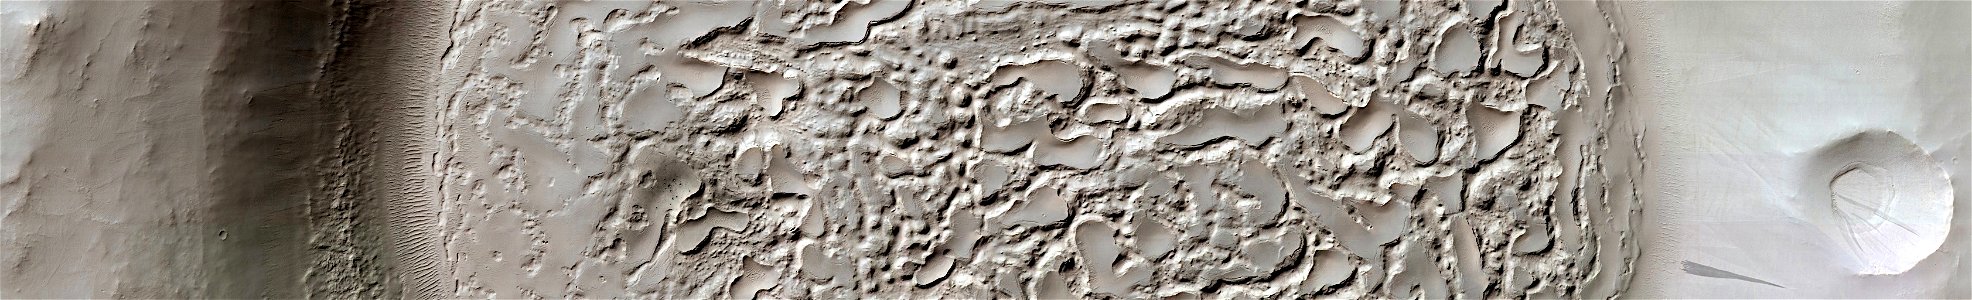 Mars - Crater Fill Material photo